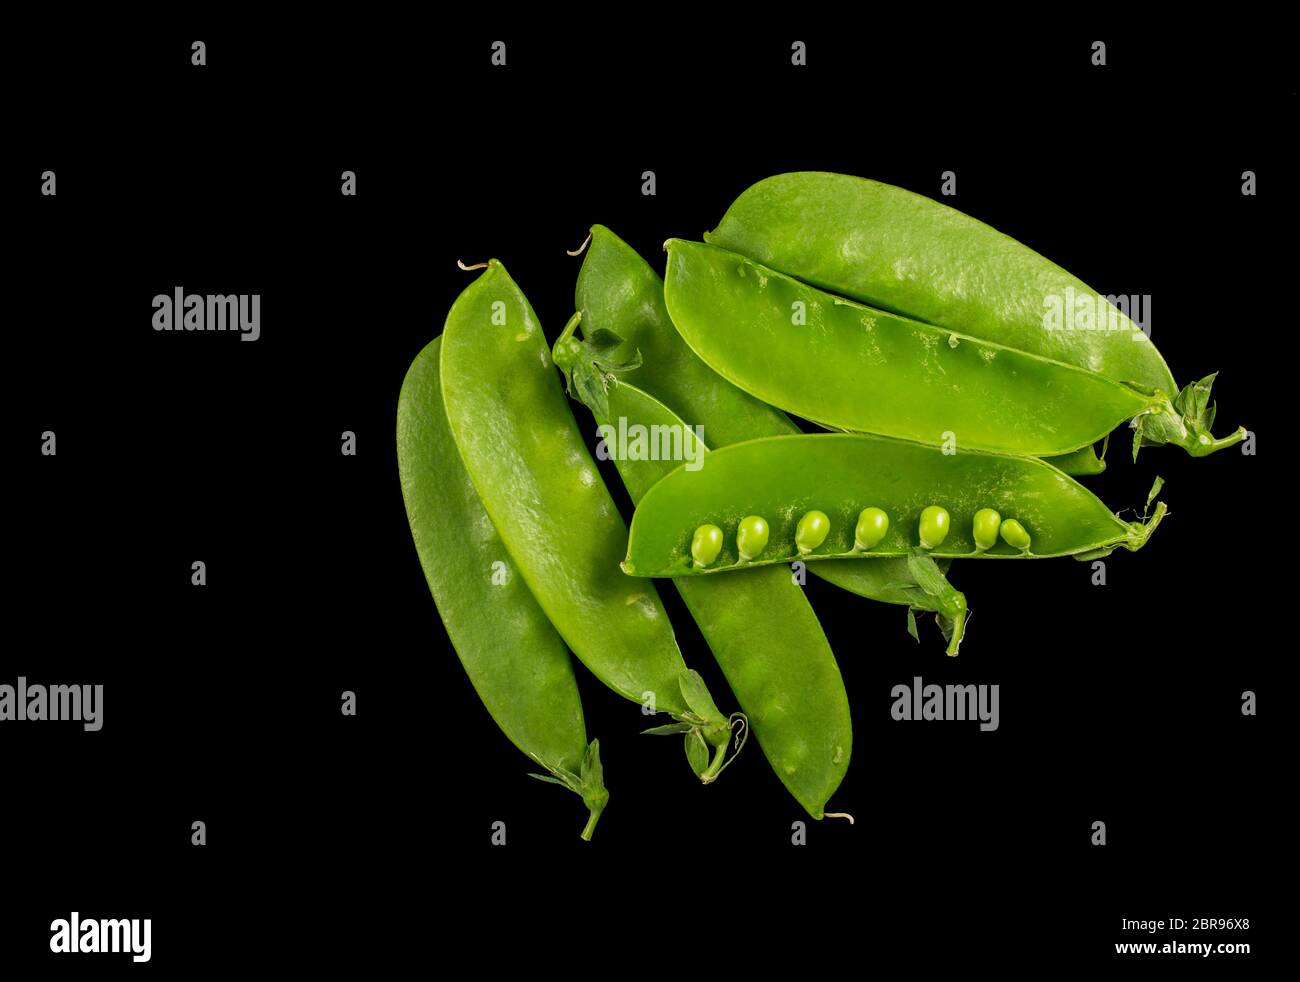 Snow pea, Pisum sativum var. saccharatum, in a black background. It is a variety of pea which is eaten whole in its pod while still unripe. Stock Photo